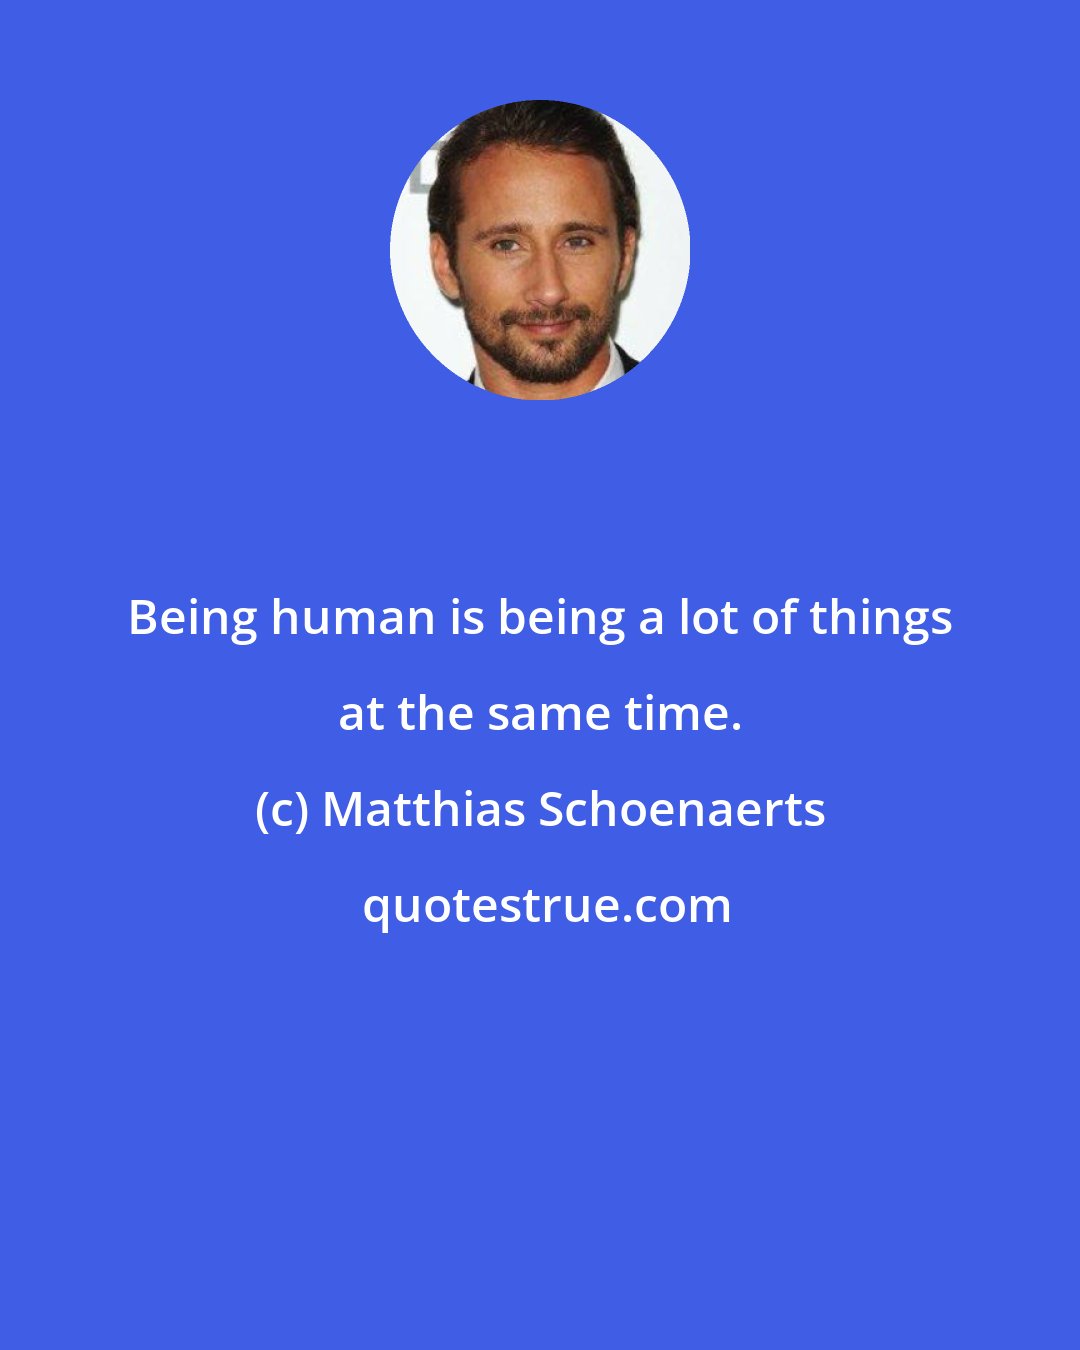 Matthias Schoenaerts: Being human is being a lot of things at the same time.